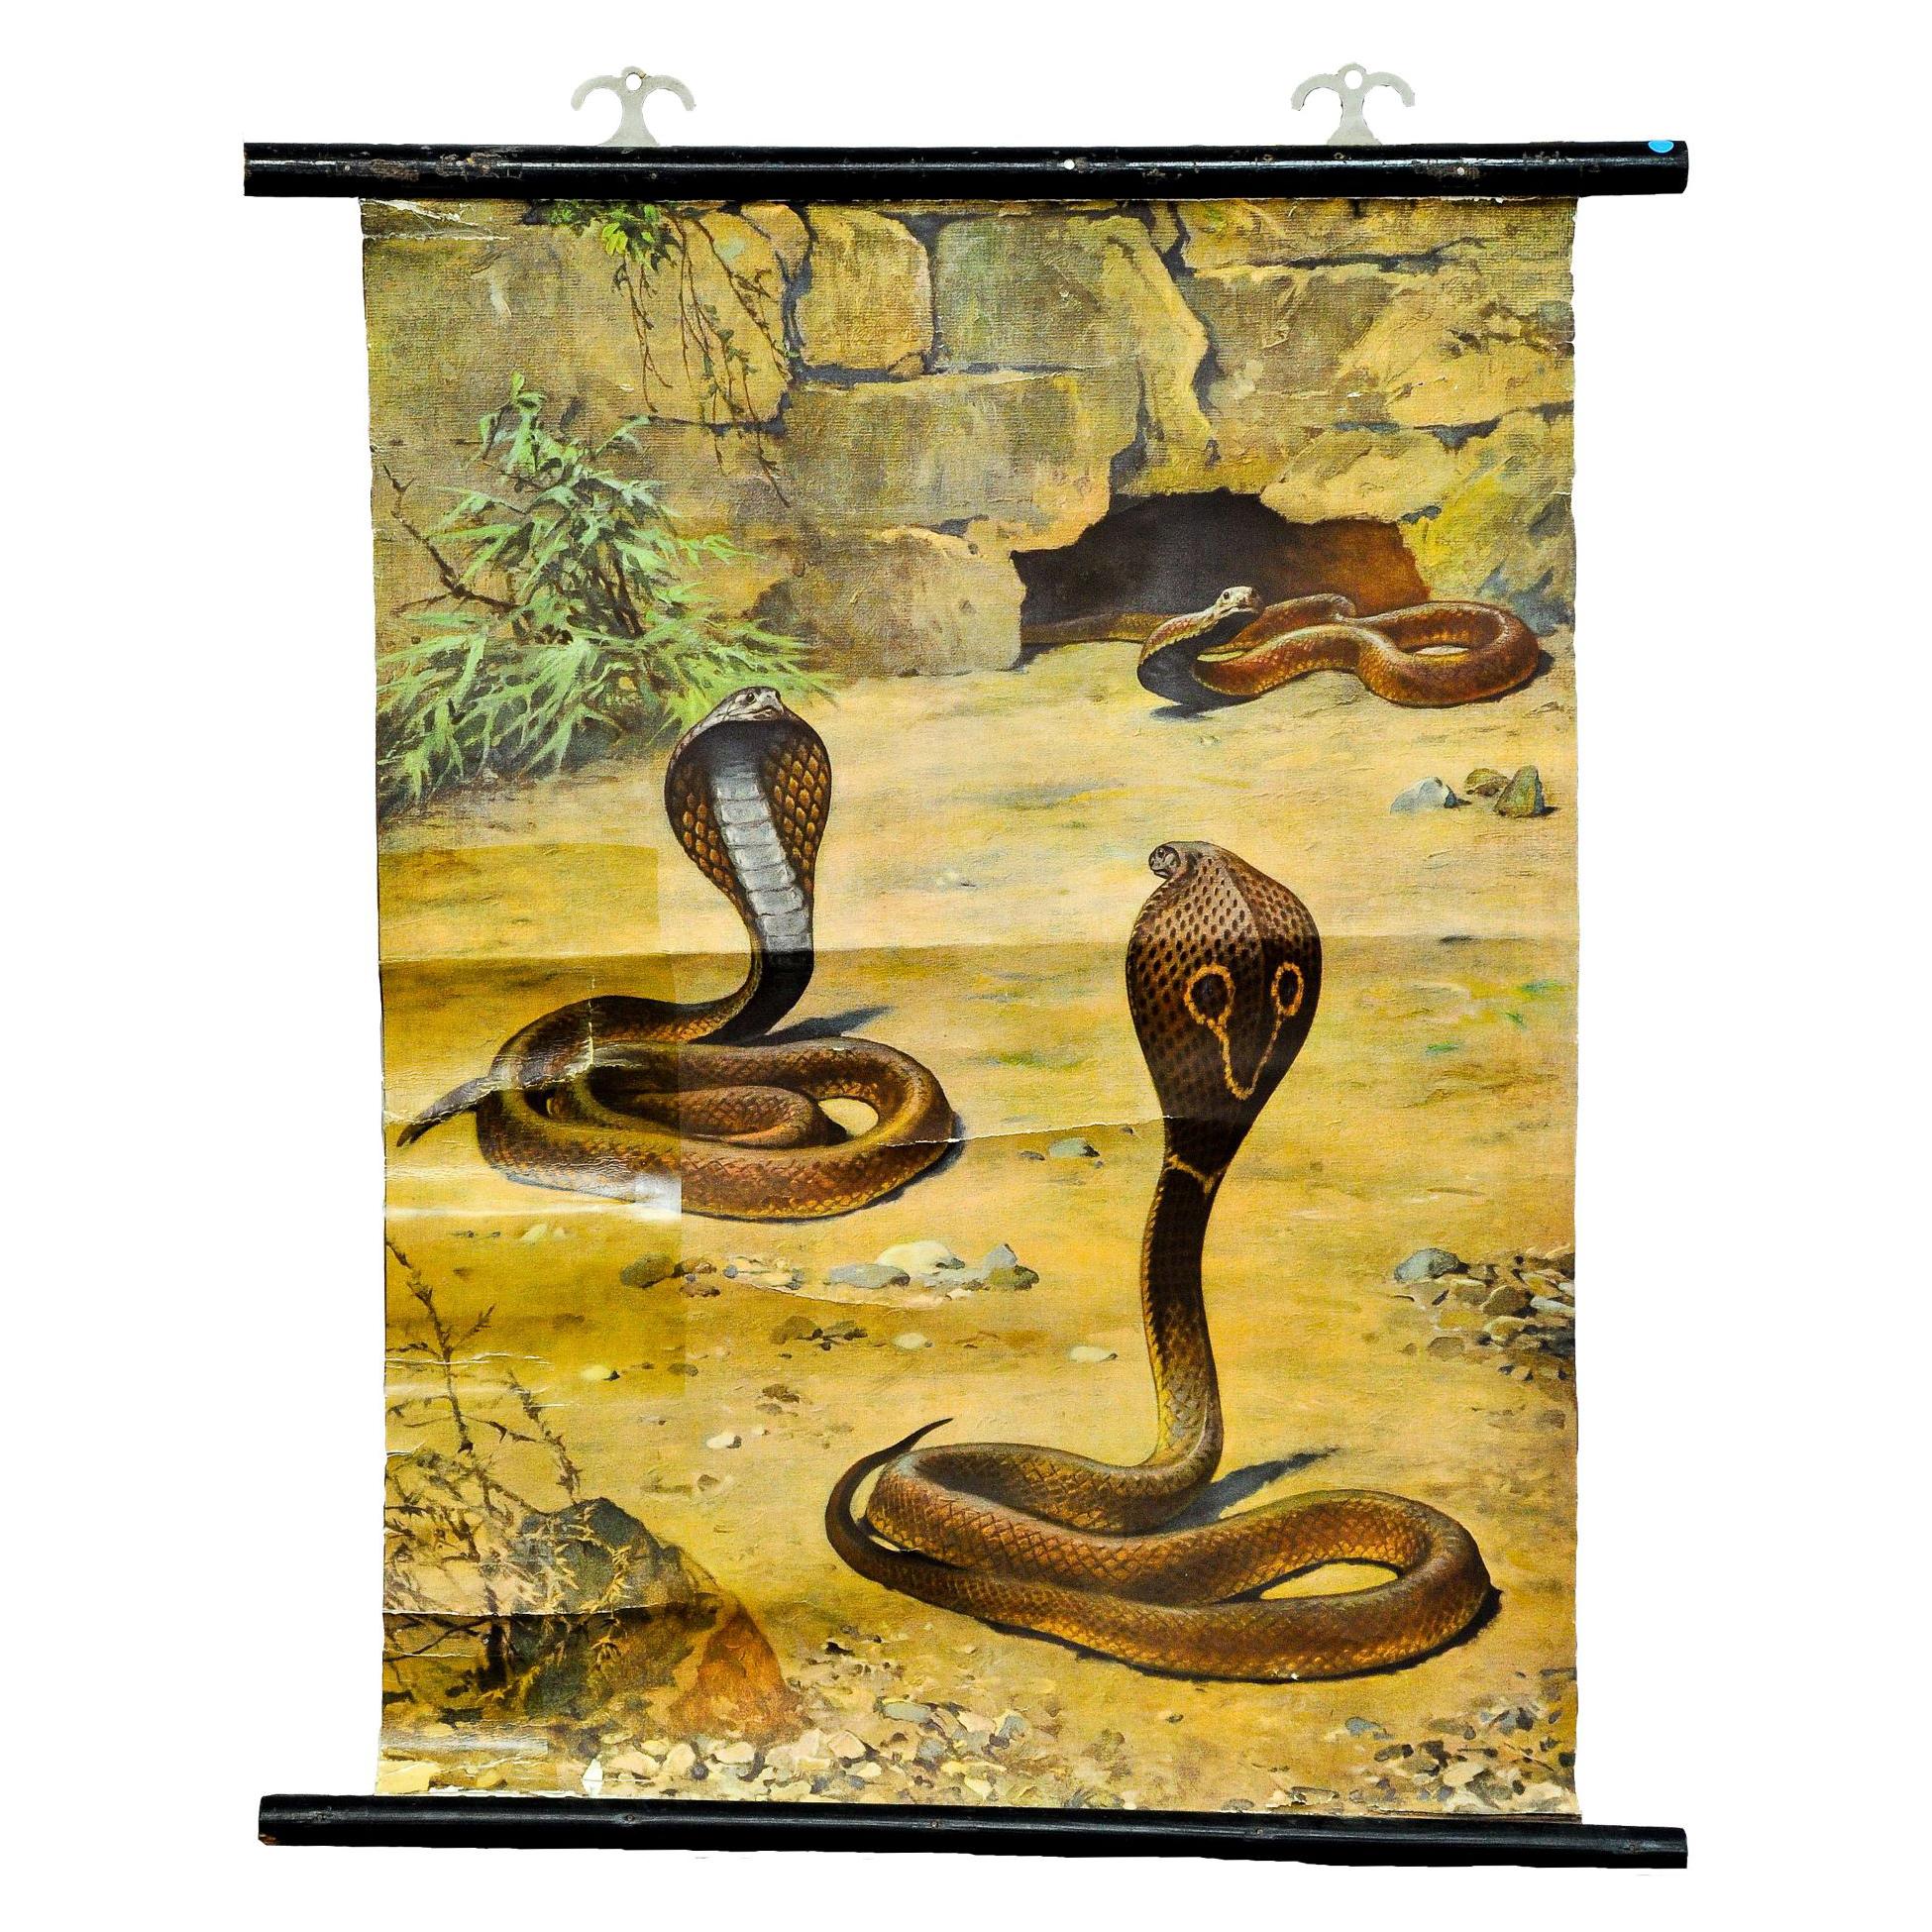 Old Mural Countrycore Pull-Down Wallchart Scenery with Cobras Snake Poster Print